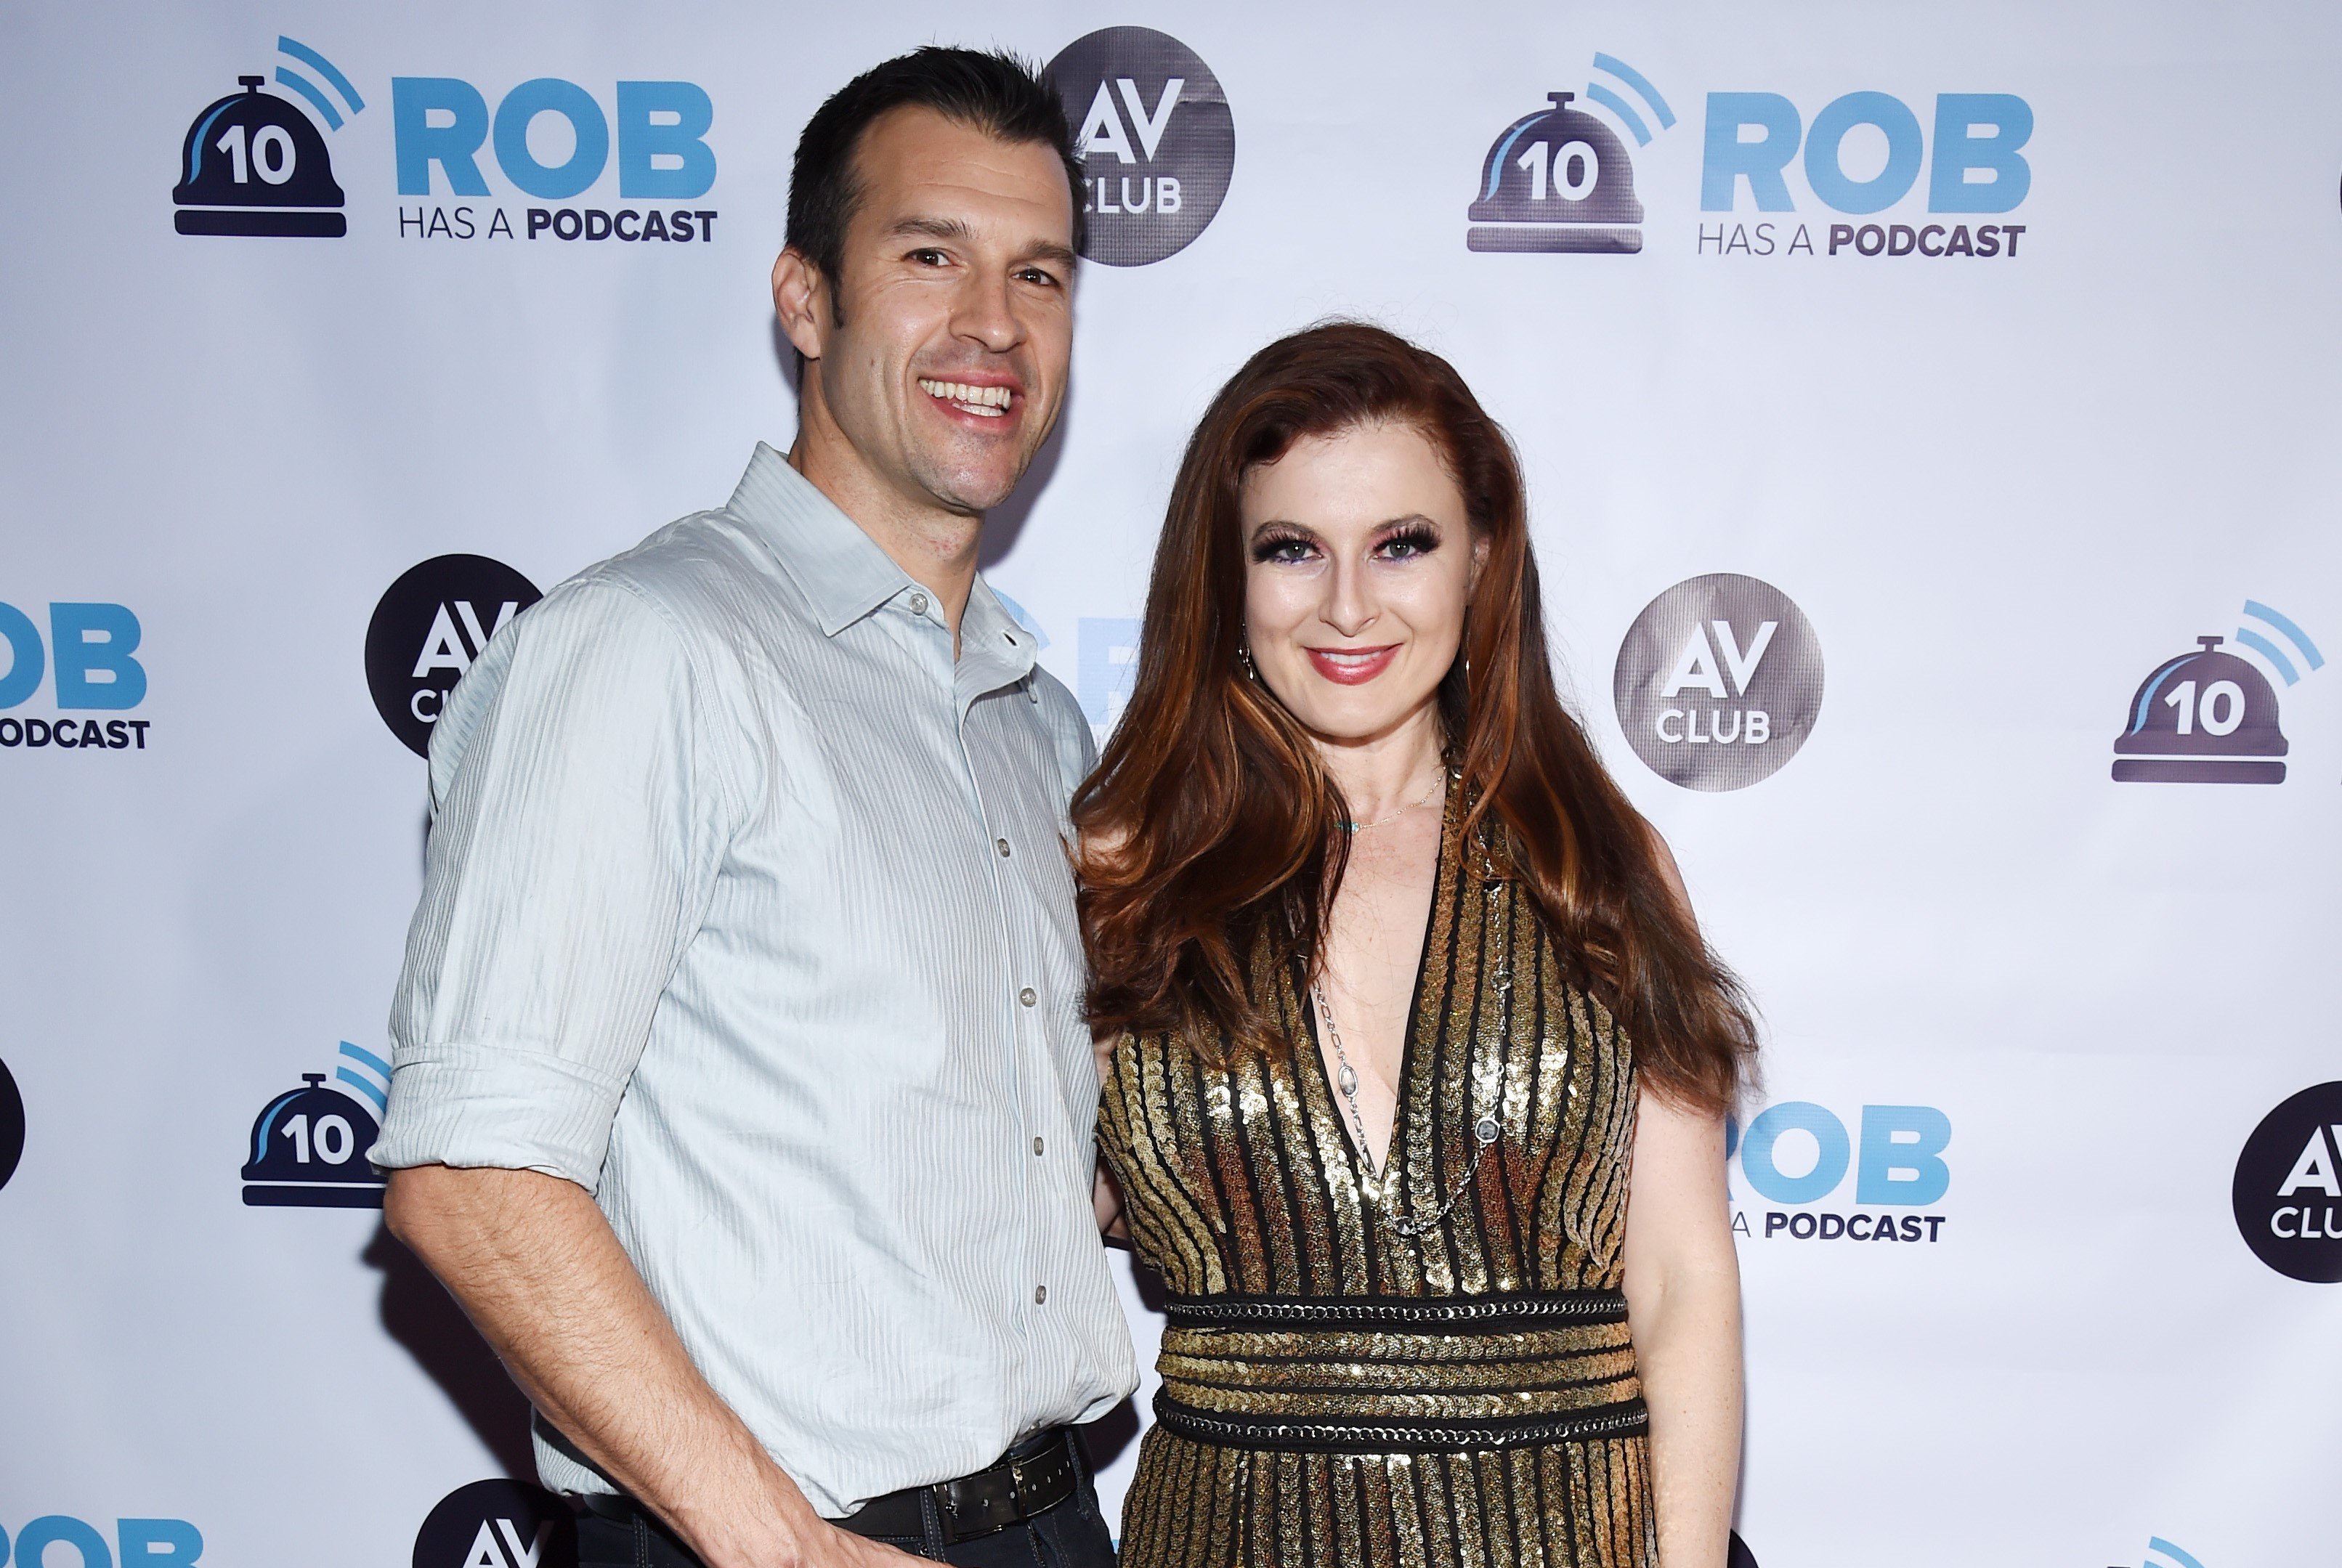 Brendon Villegas and Rachel Reilly, who met in 'Big Brother 12' on CBS, pose for pictures on the red carpet. Brendon wears a white button-up shirt over black pants. Rachel wears a gold and black sequined dress.